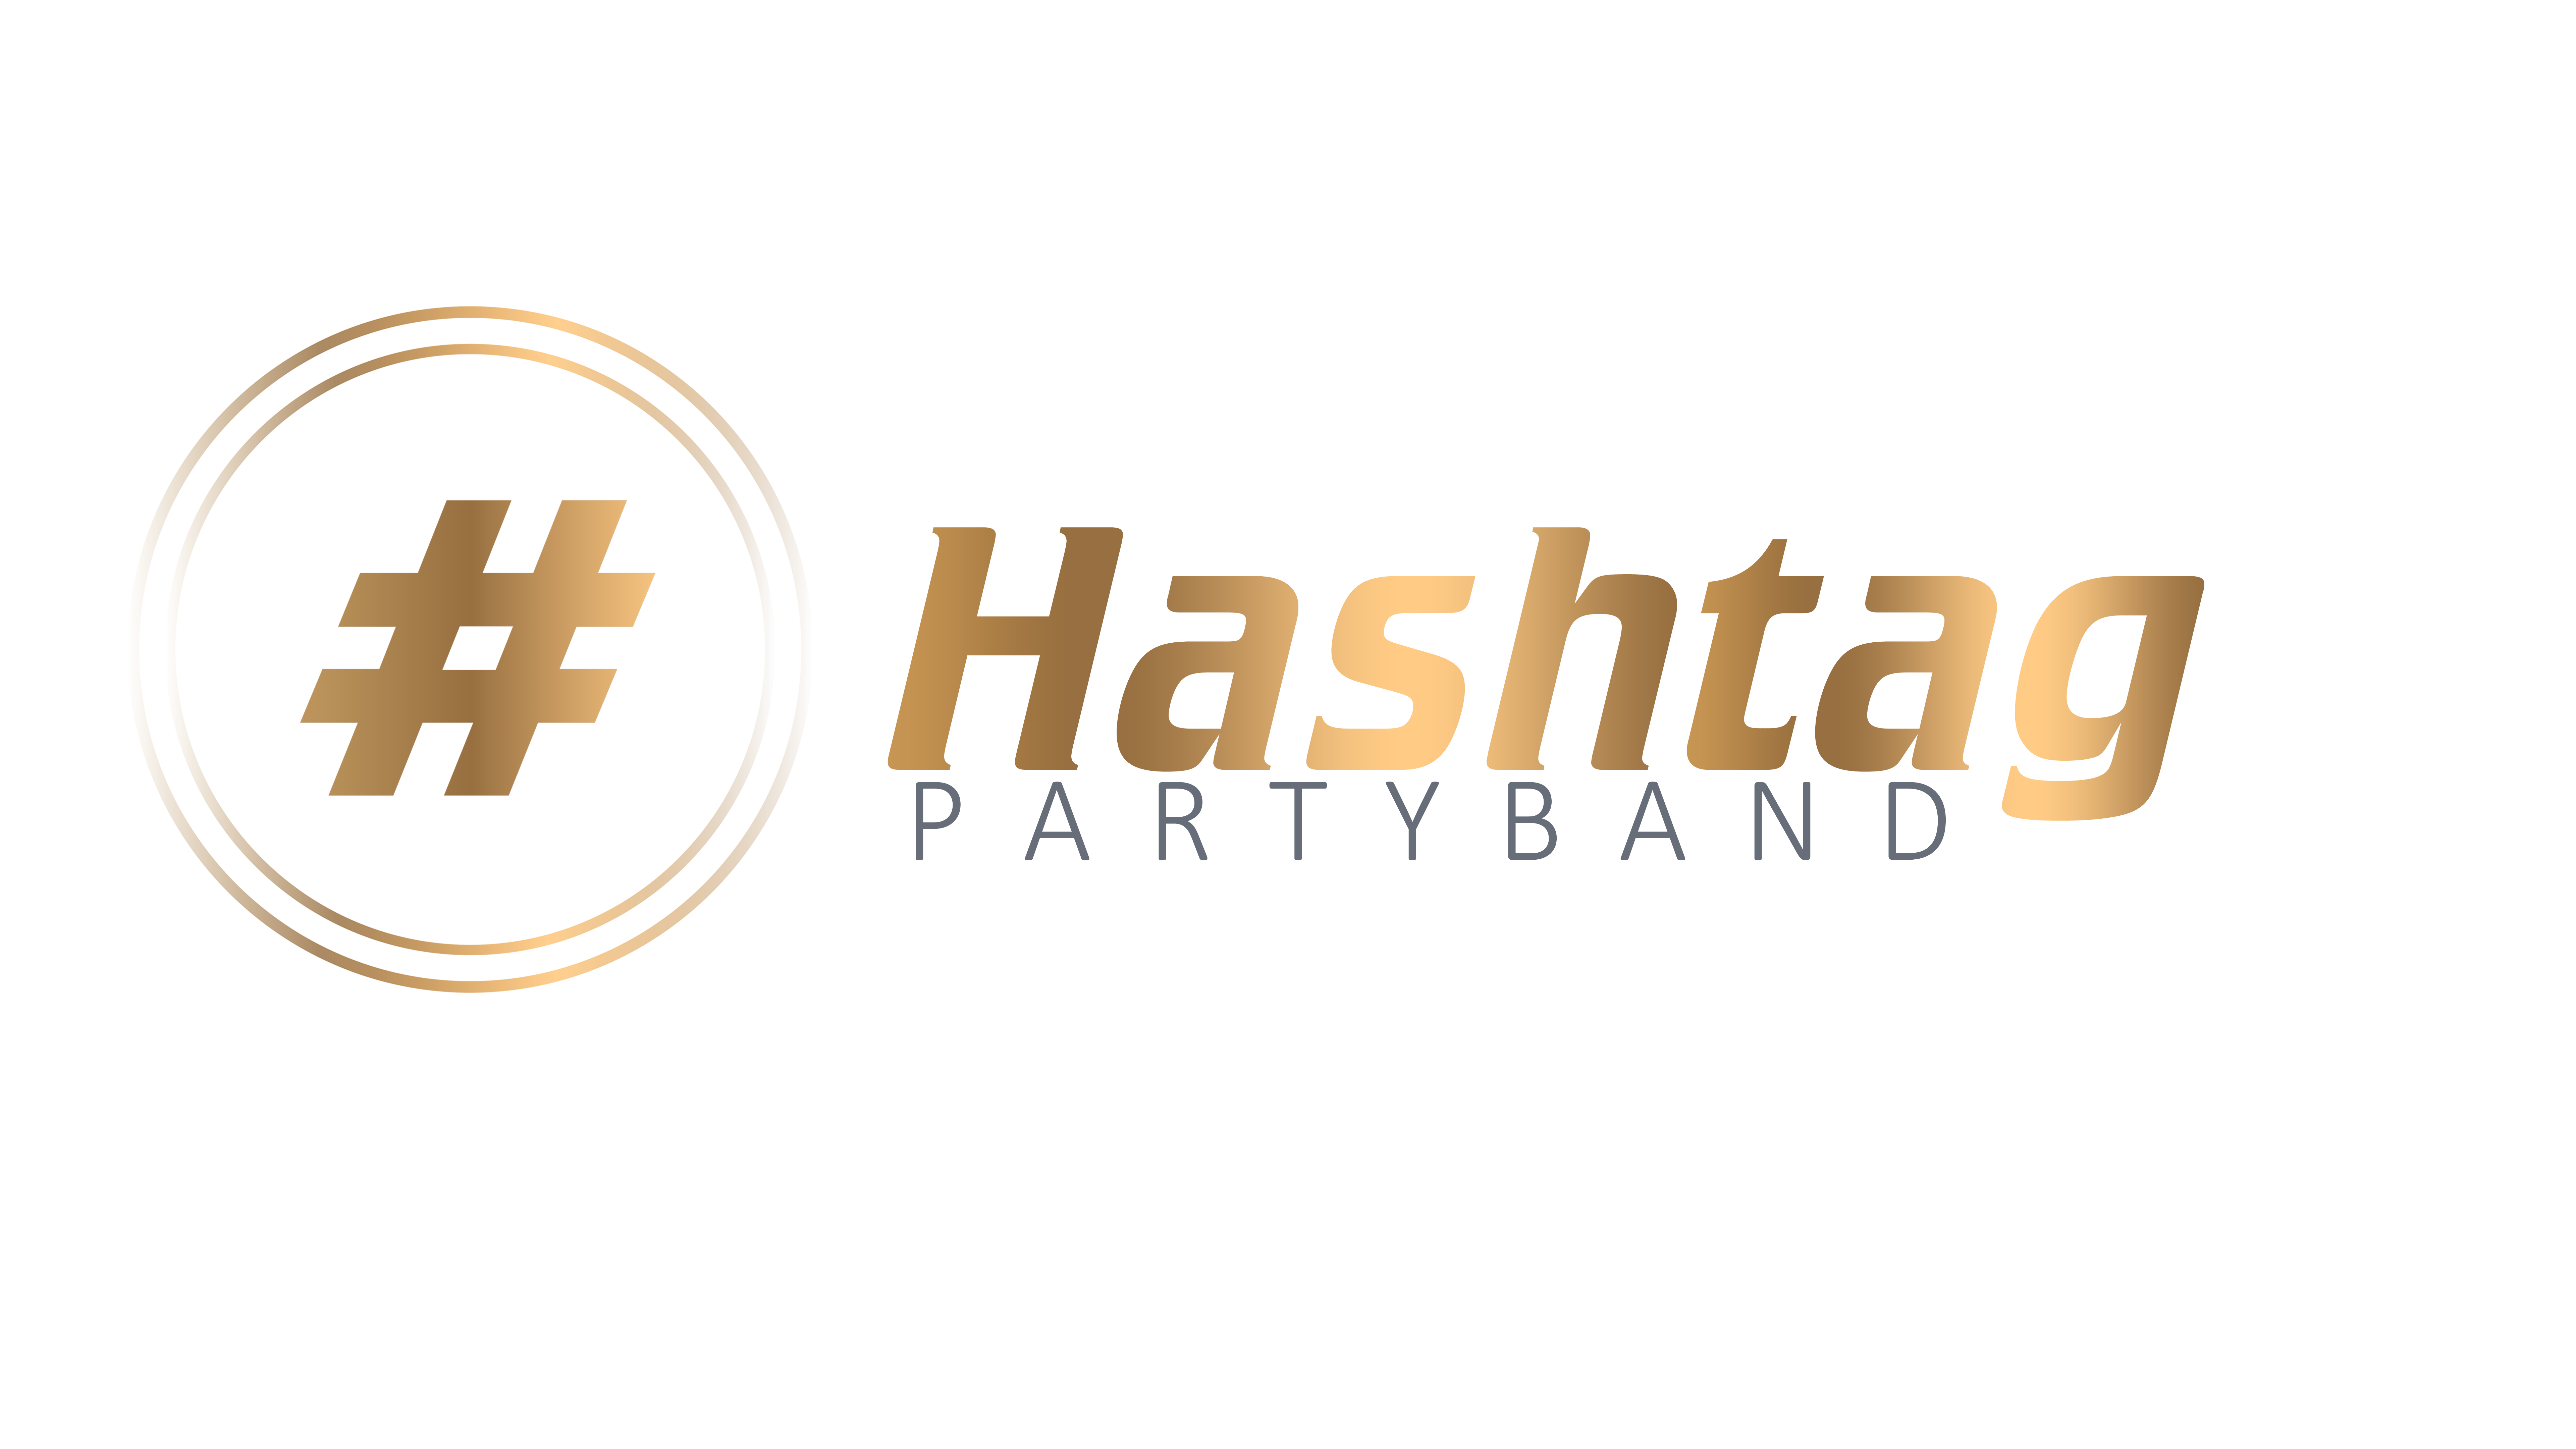 Hashtag Partyband